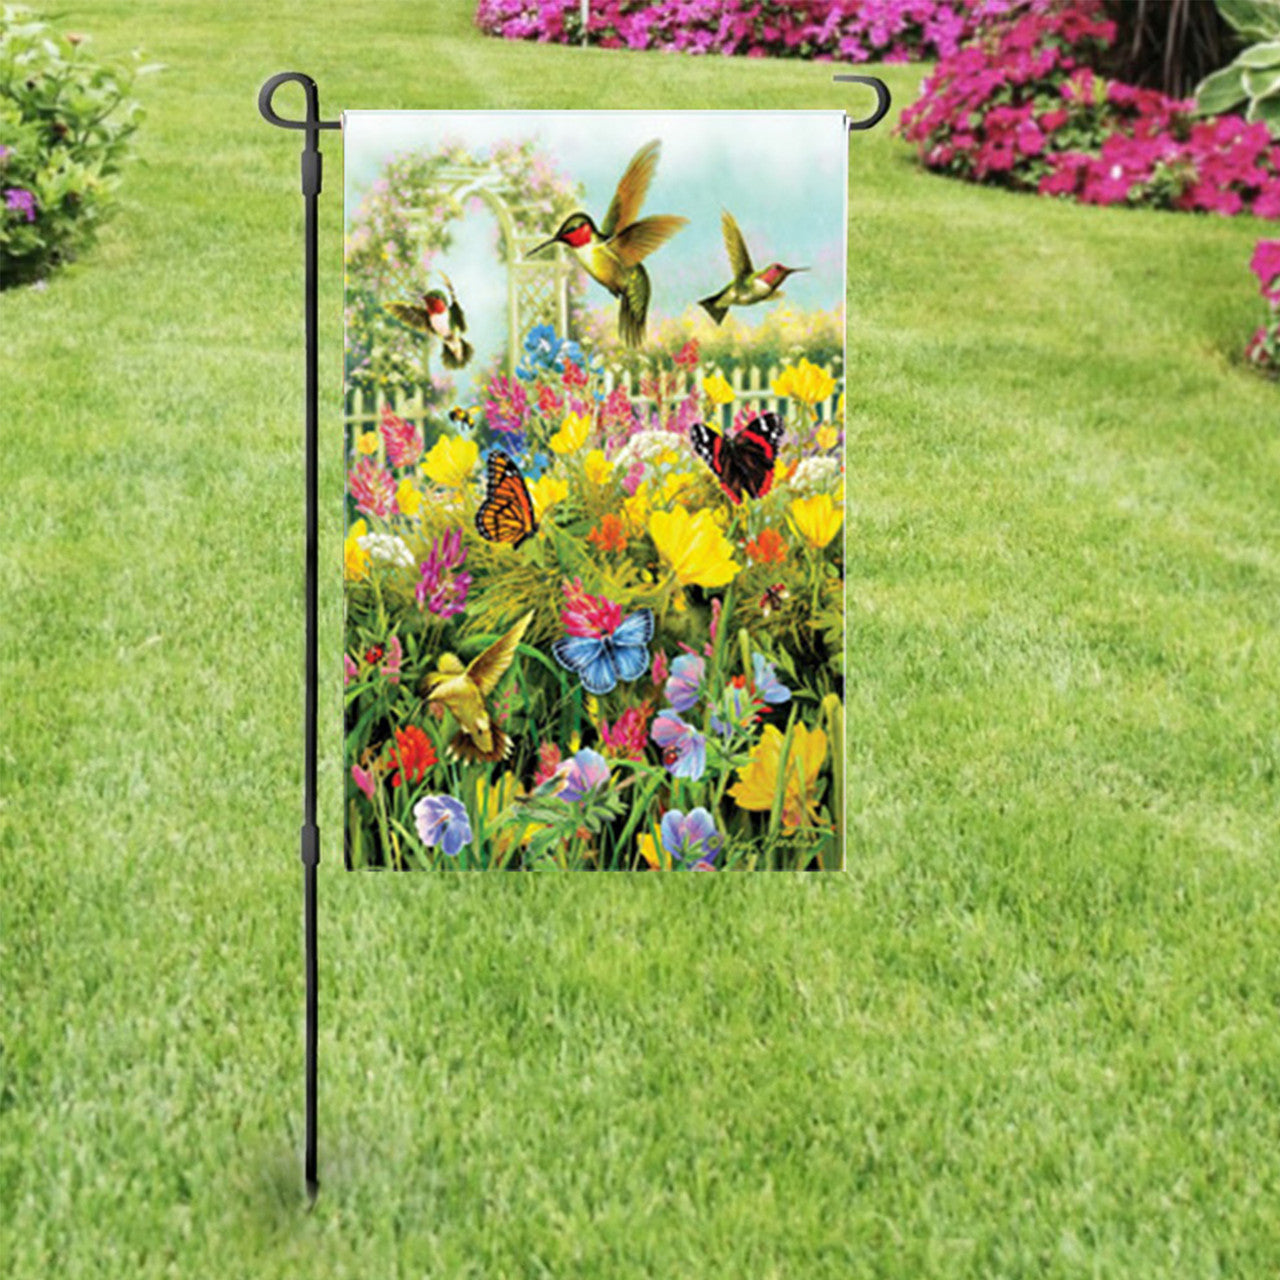 (12 x 18") Garden Flags Banners - DIY Personalized Garden Flag for Outdoor Patio Garden Yard Decorate - Lawn Yard Banner, 10Pcs